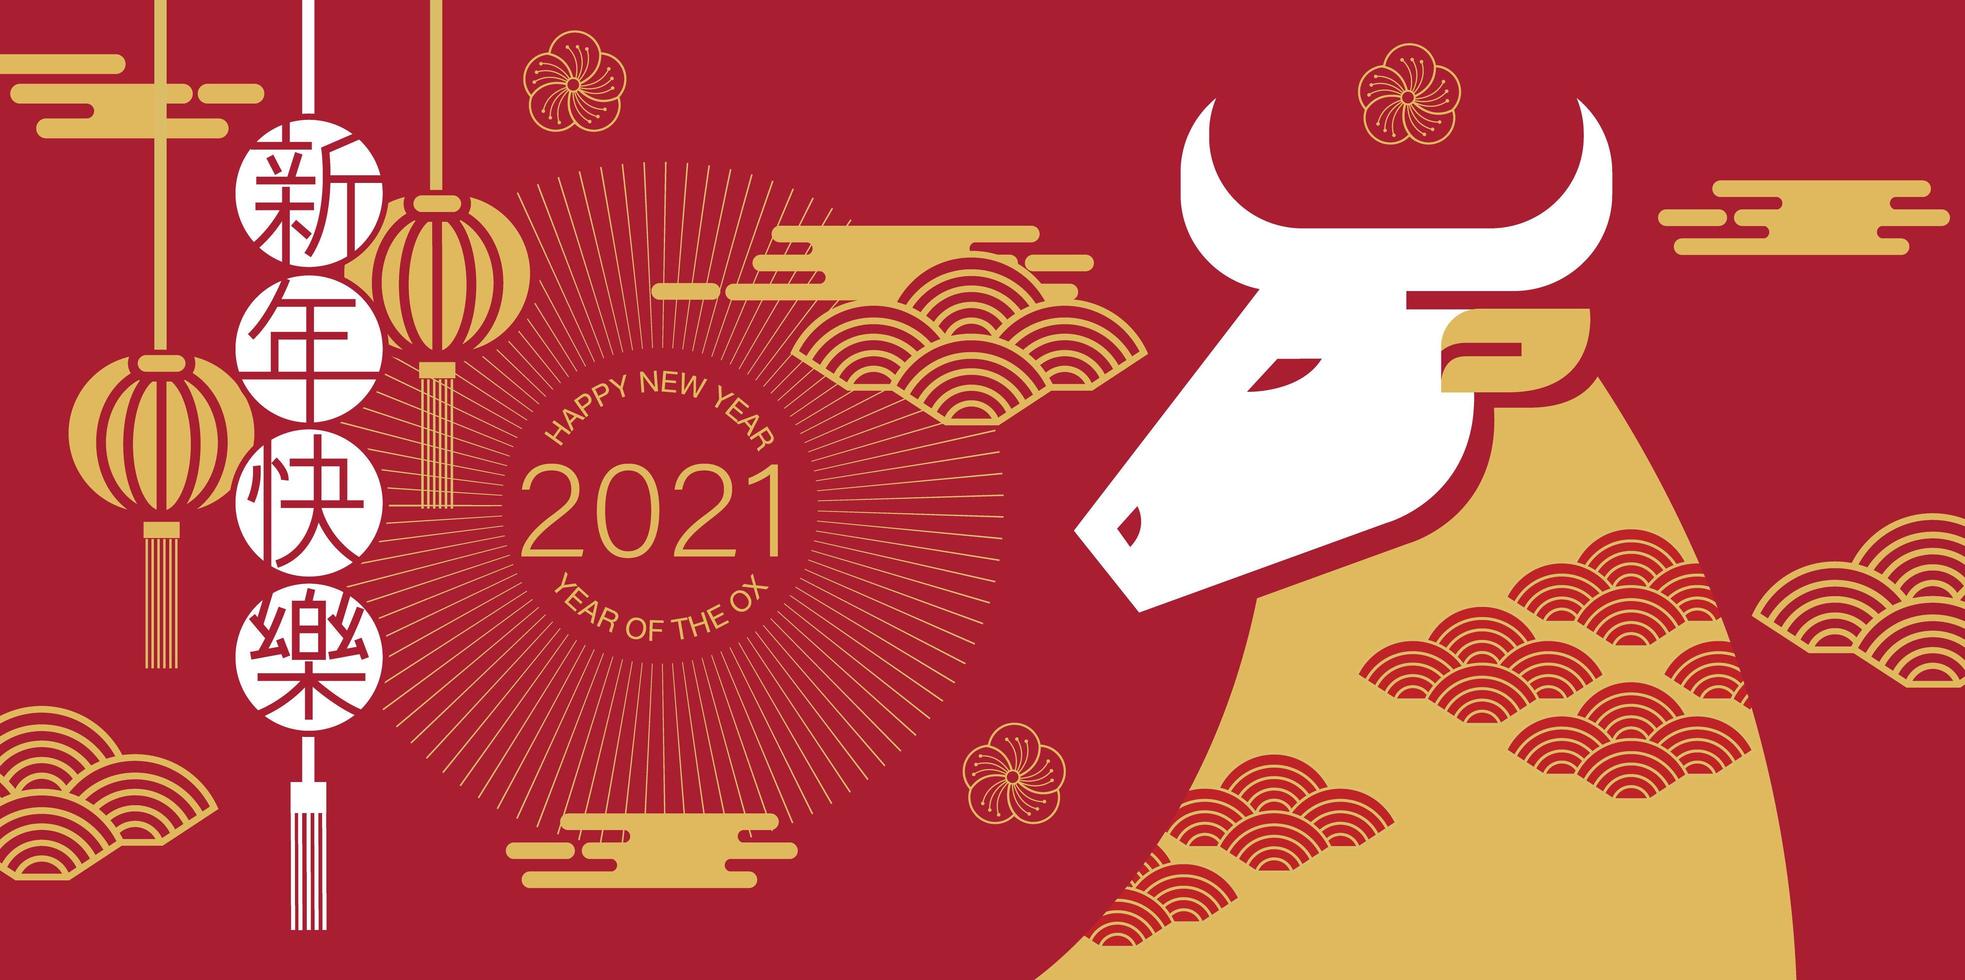 chinese-new-year-2021-banner-with-side-view-of-ox-vector.jpg